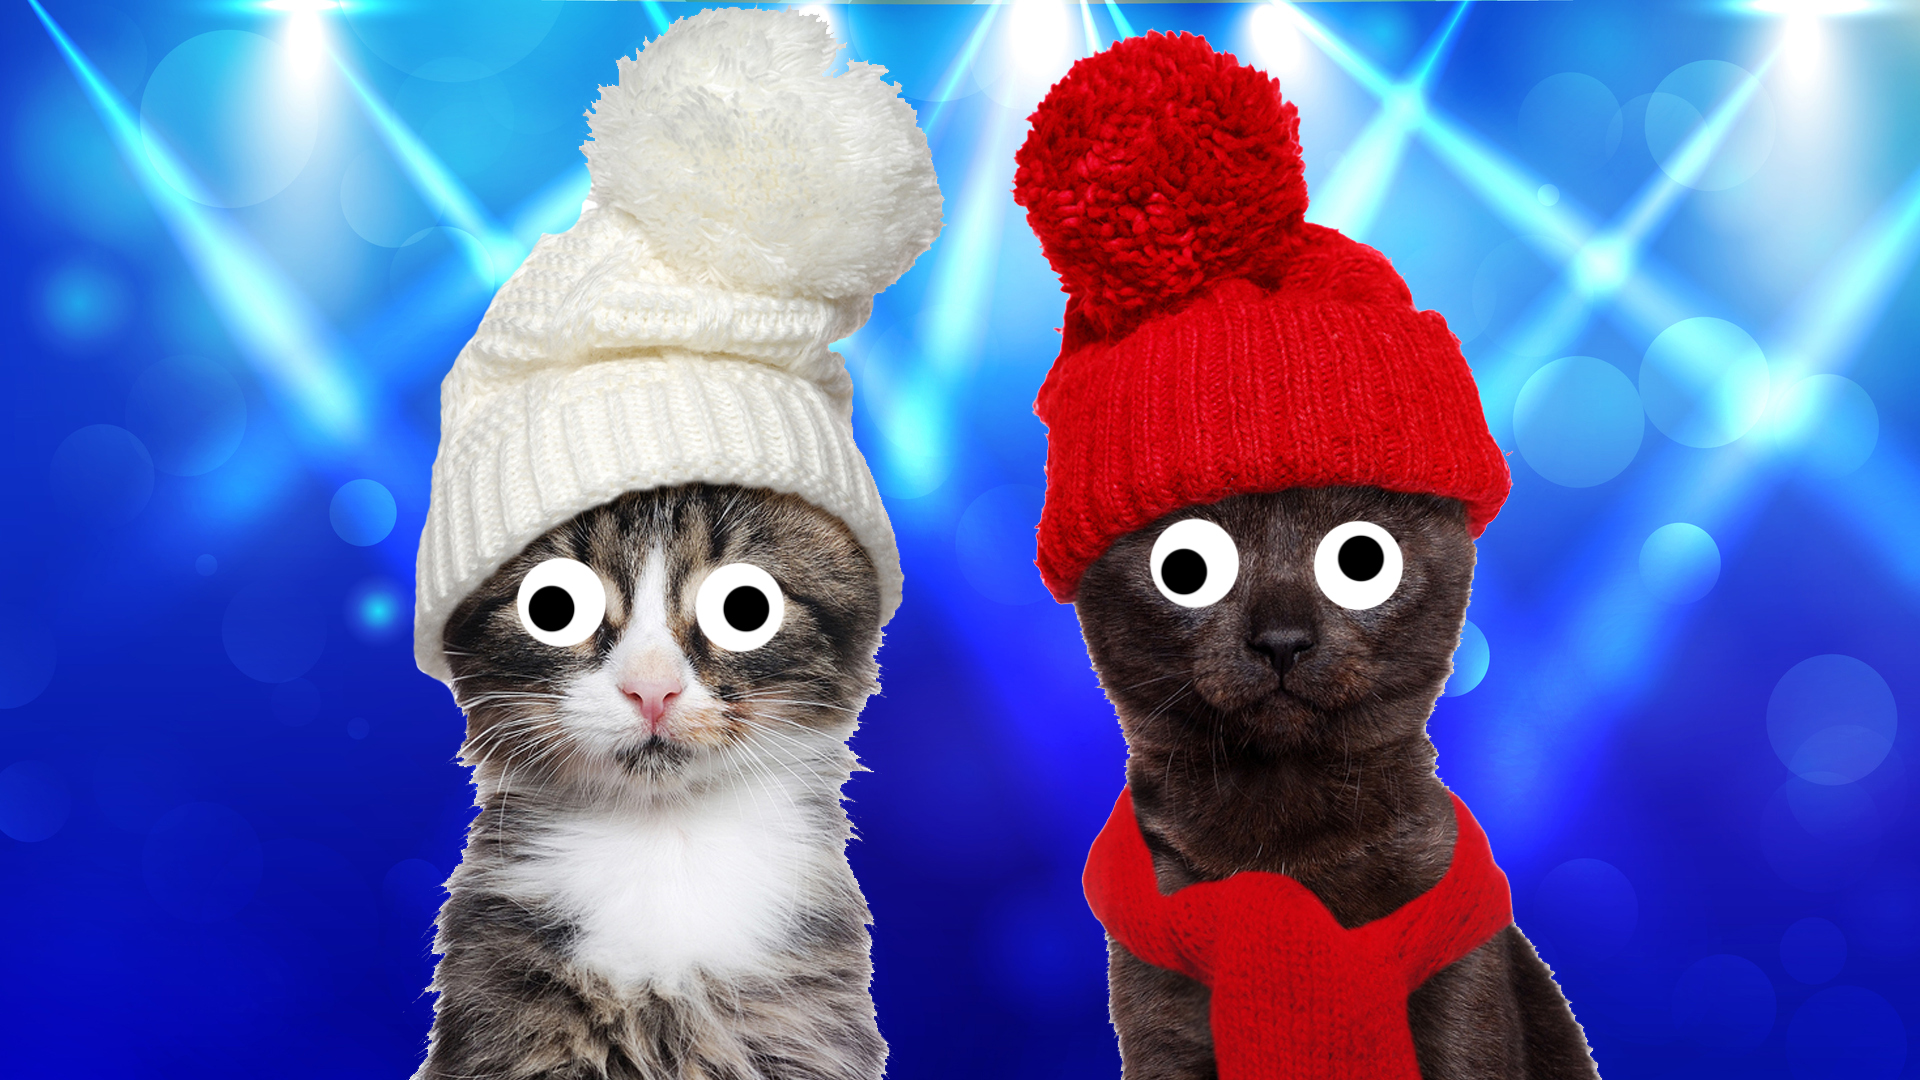 Cats in wooly hats